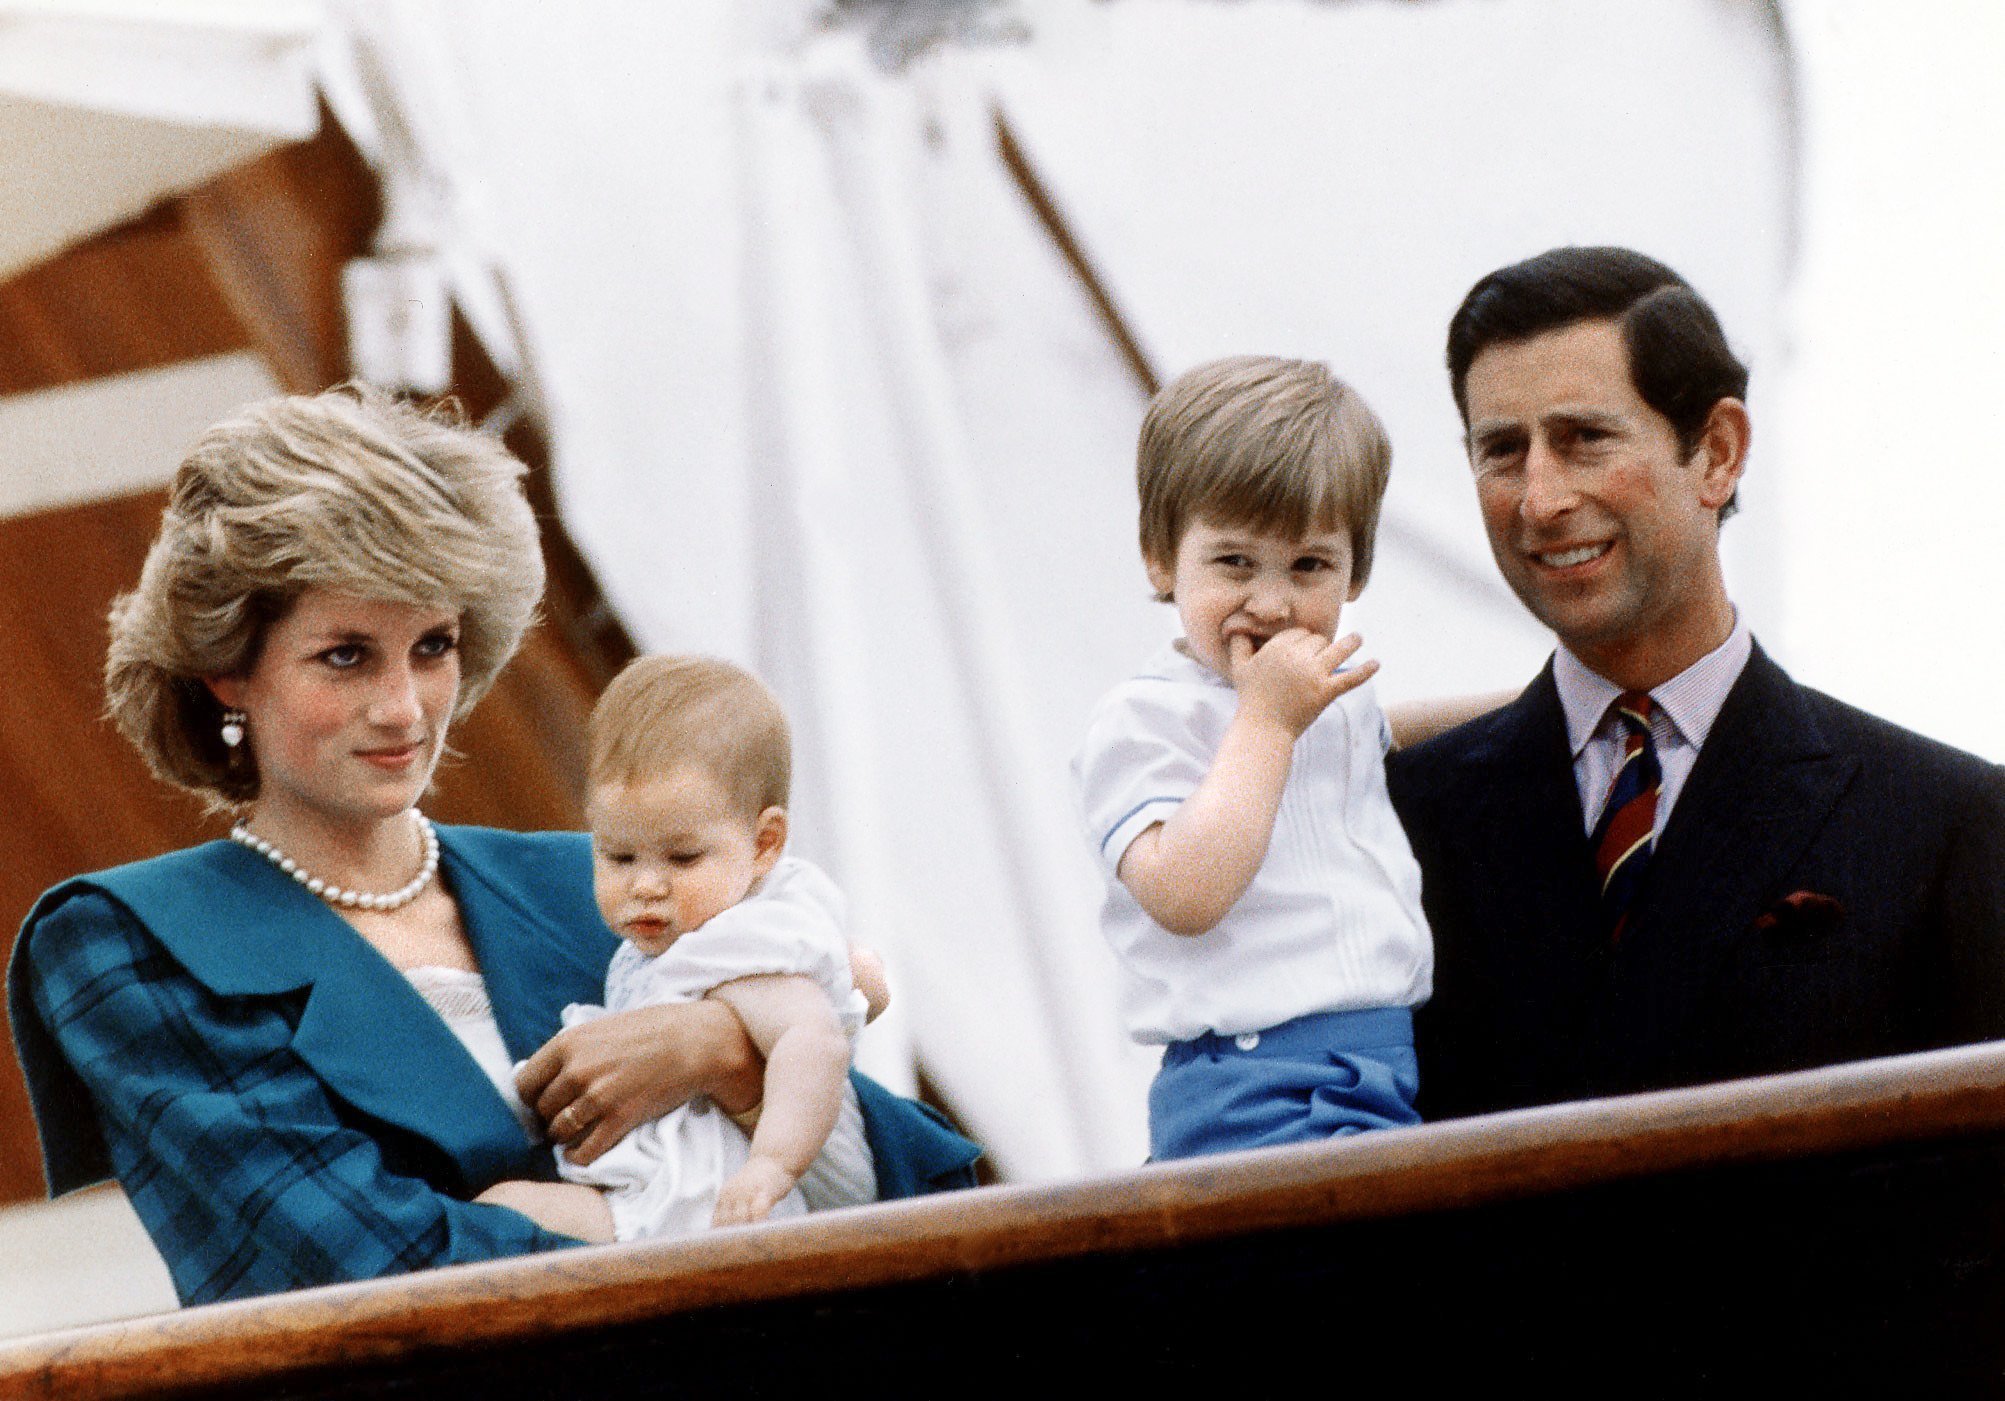 Princess Diana and Prince Charles pictured with their sons Princes Harry and William on May 6, 1998 during their visit to Venice, Italy. / Source: Getty Images